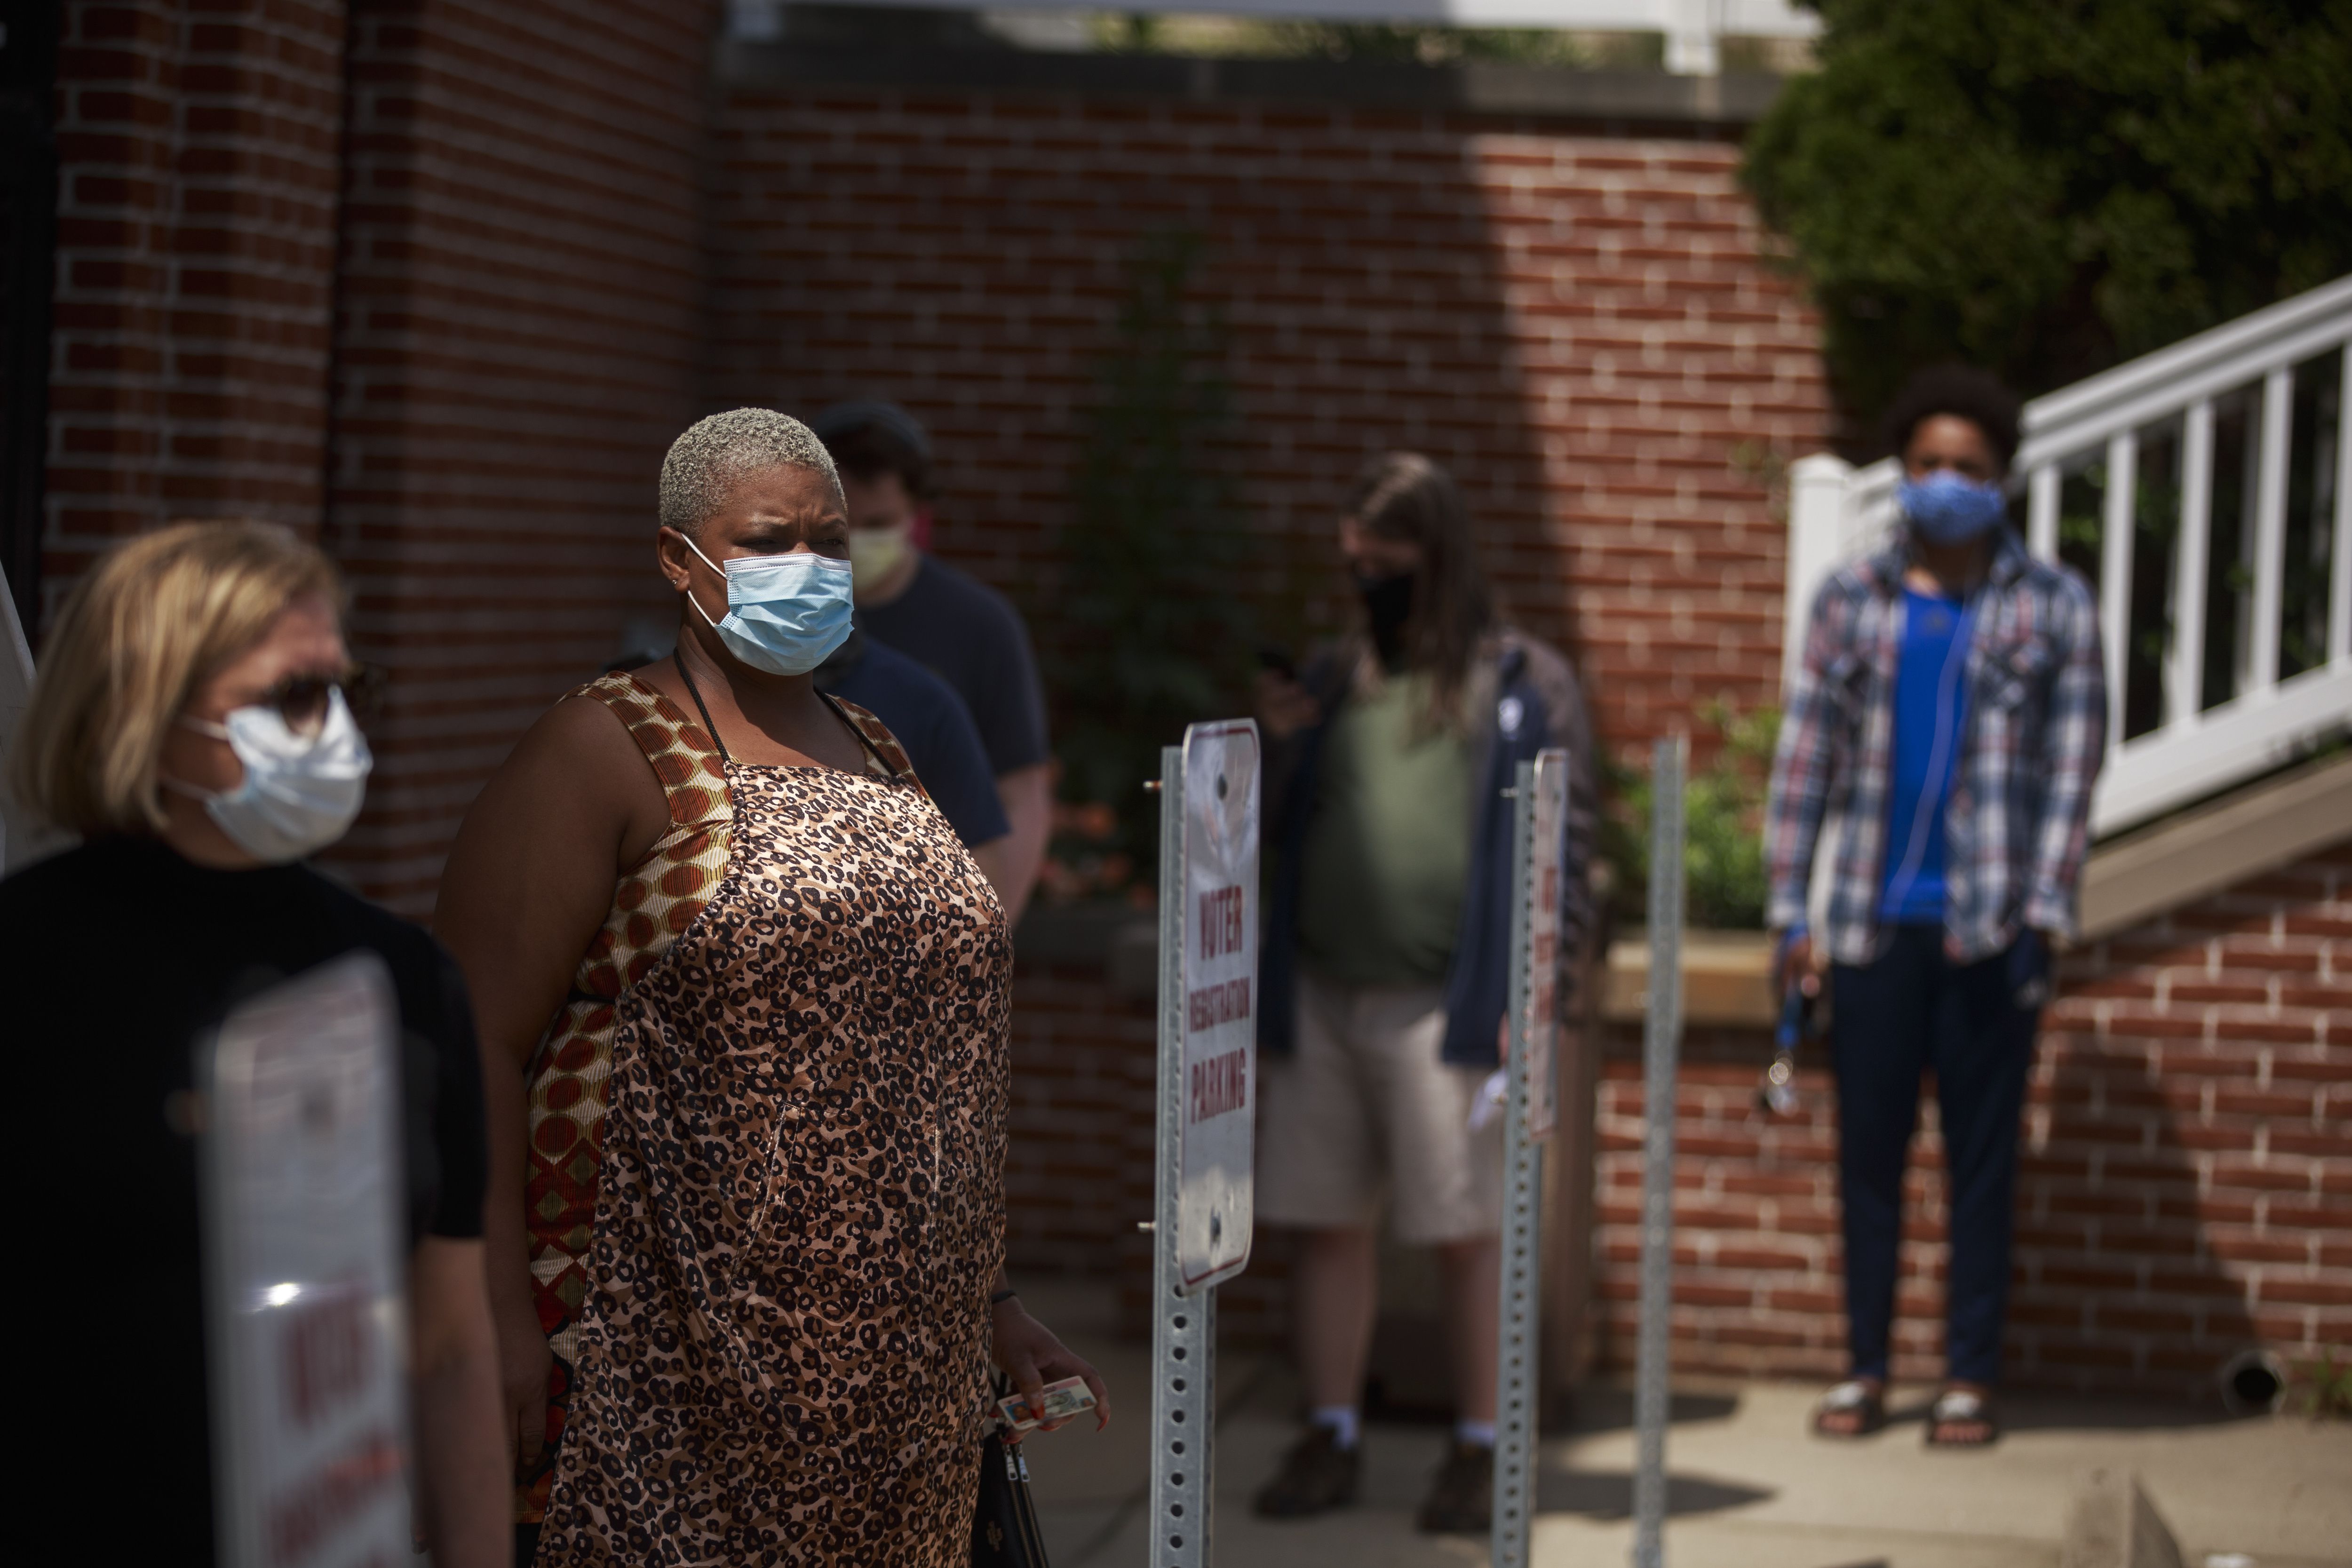 Two women stand at the front of a line ofpeople wearing face masks and standing outside